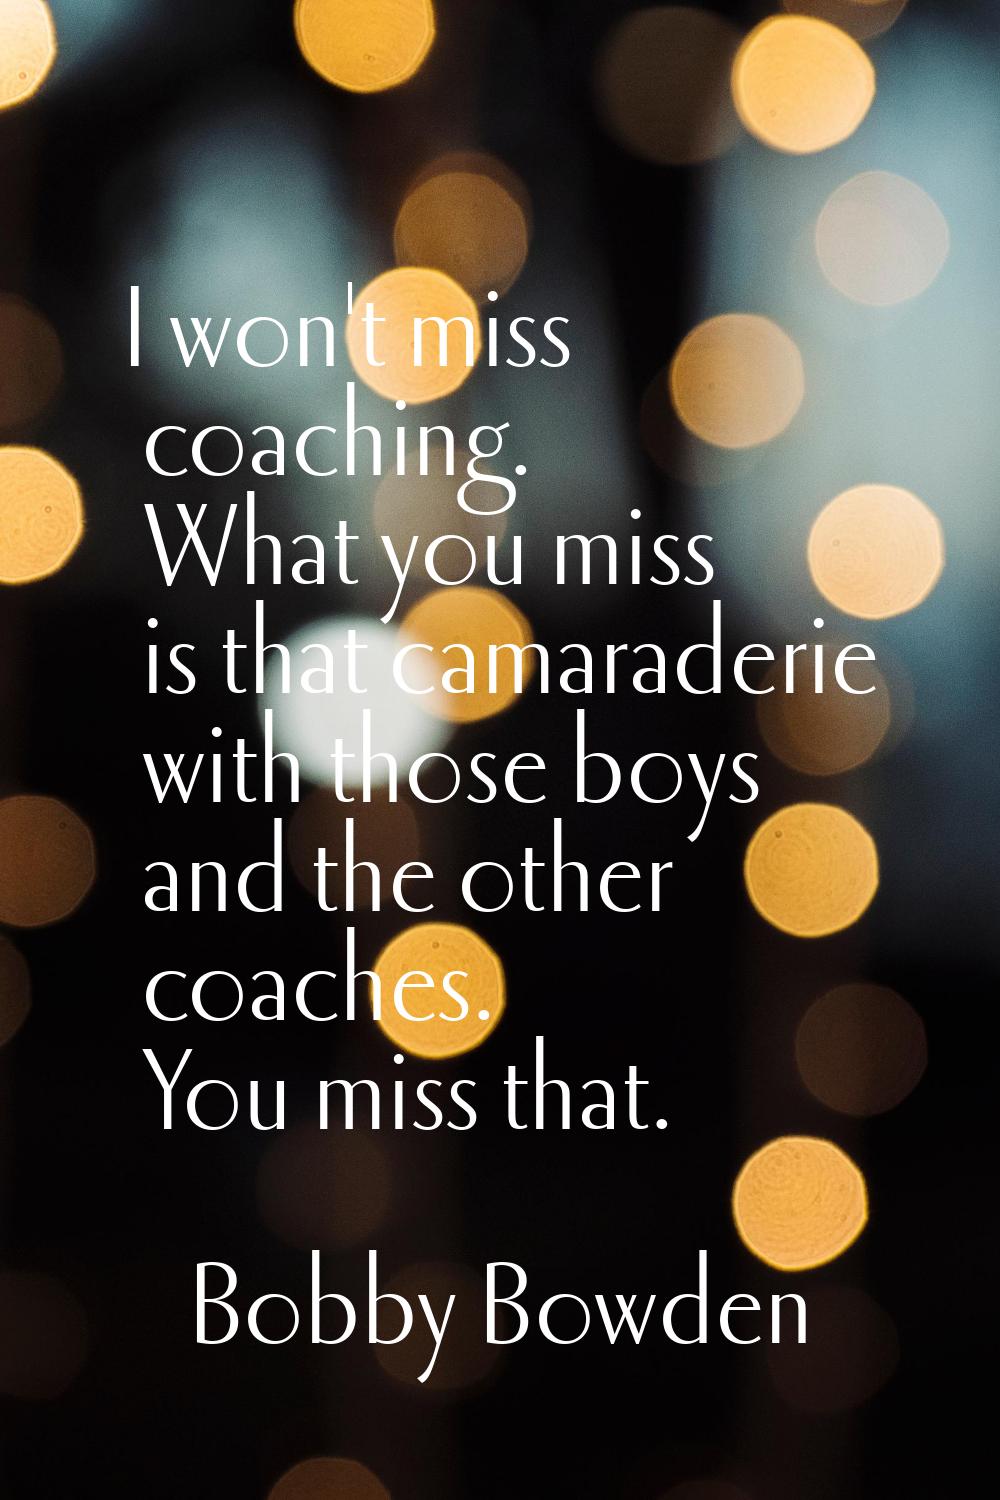 I won't miss coaching. What you miss is that camaraderie with those boys and the other coaches. You